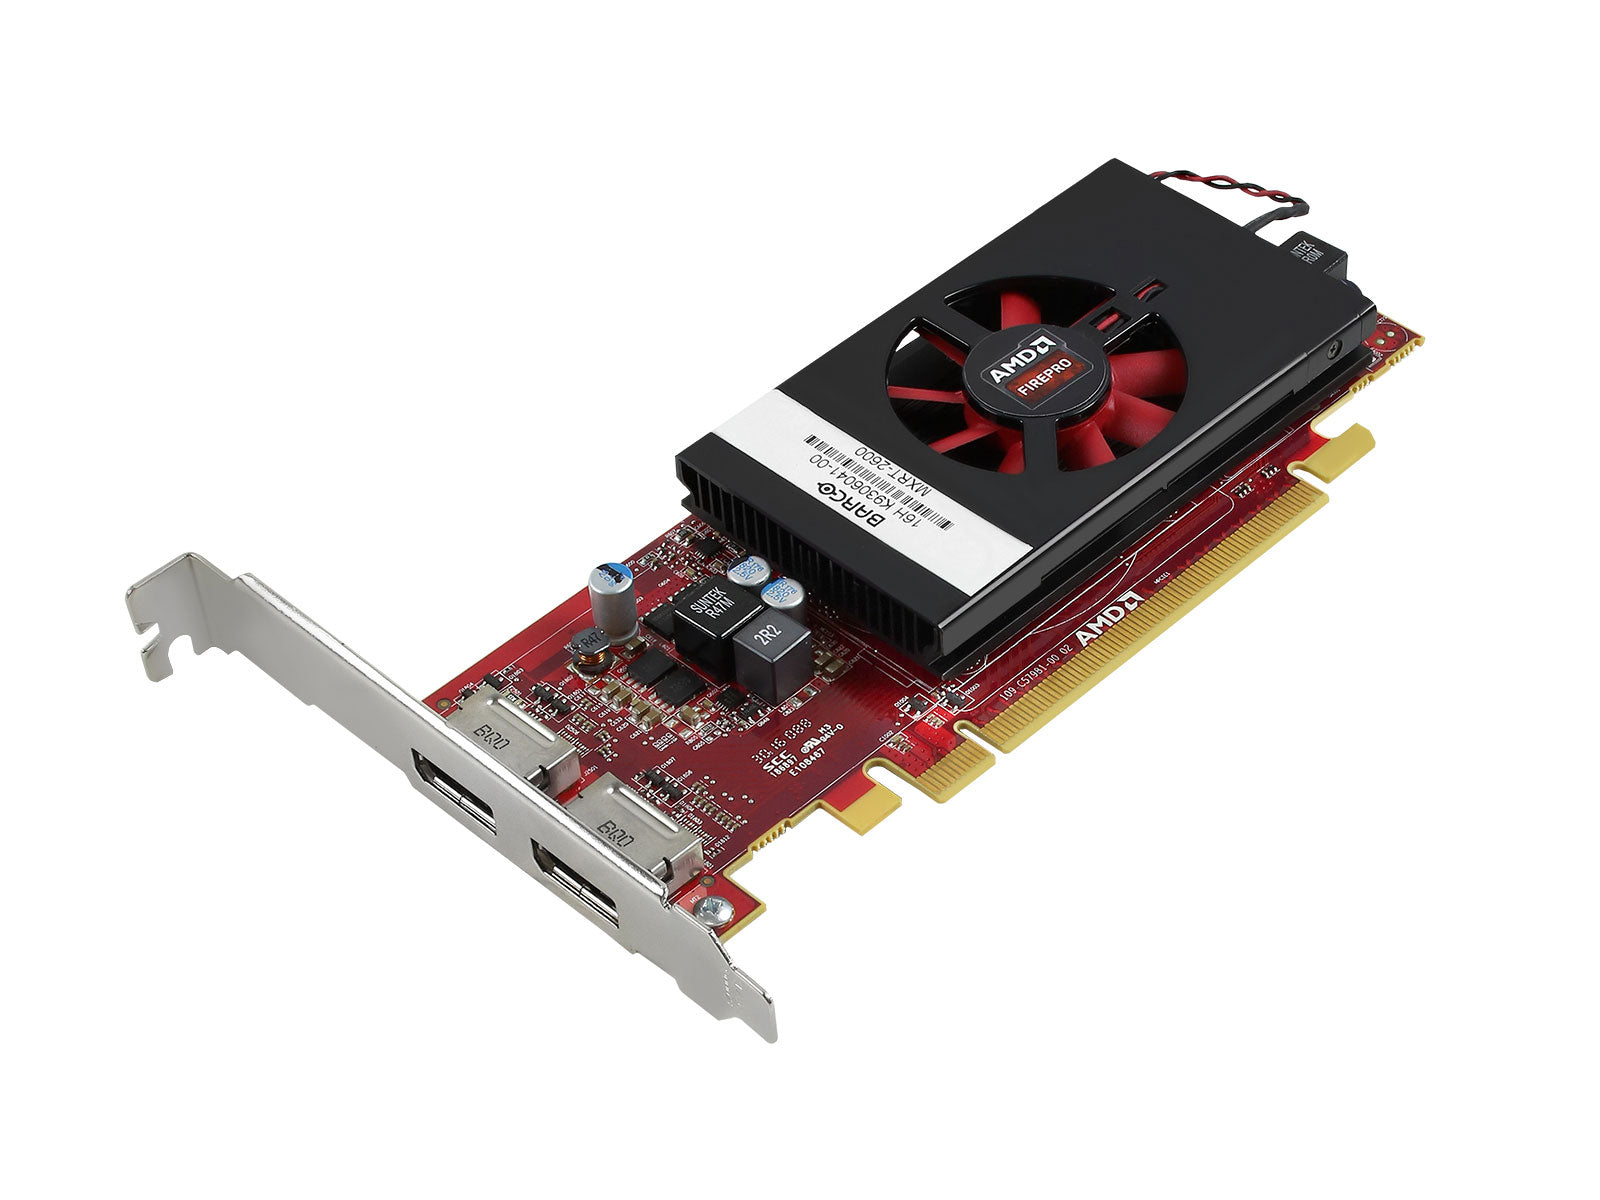  Barco® MXRT-2600 4GB Graphic Cards